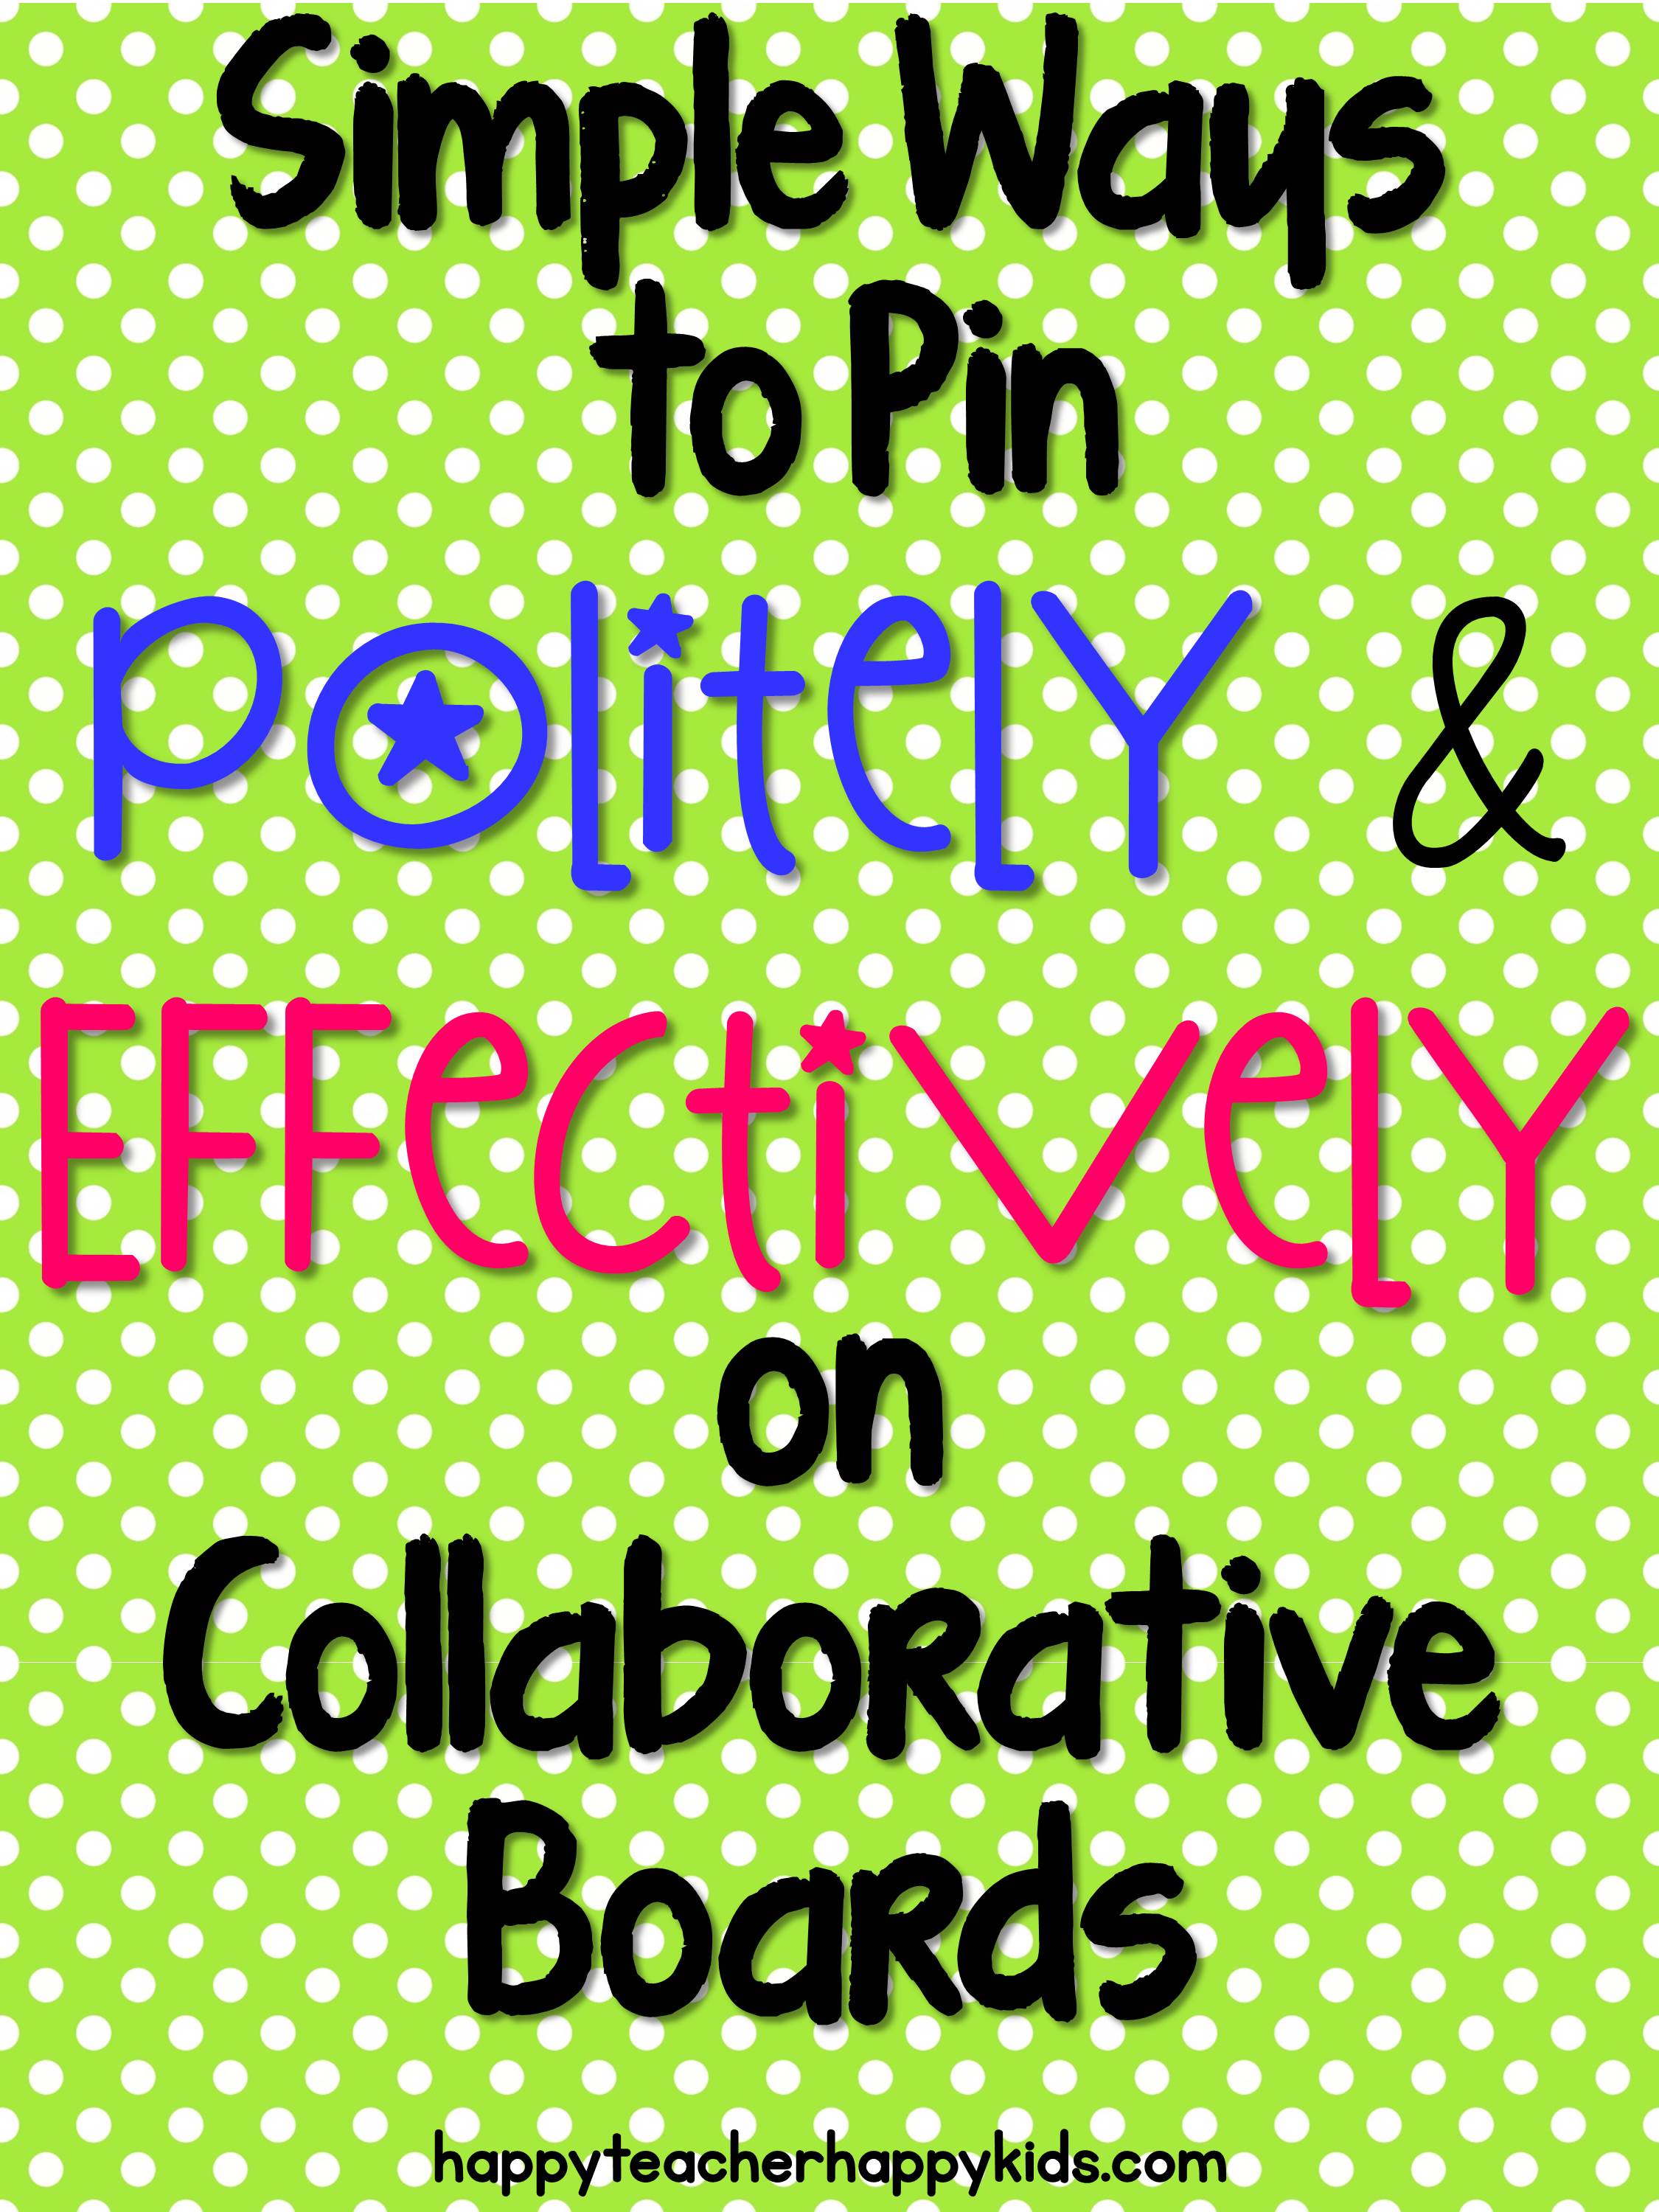 Simple Ways to Politely & Effectively on Collaborative Boards